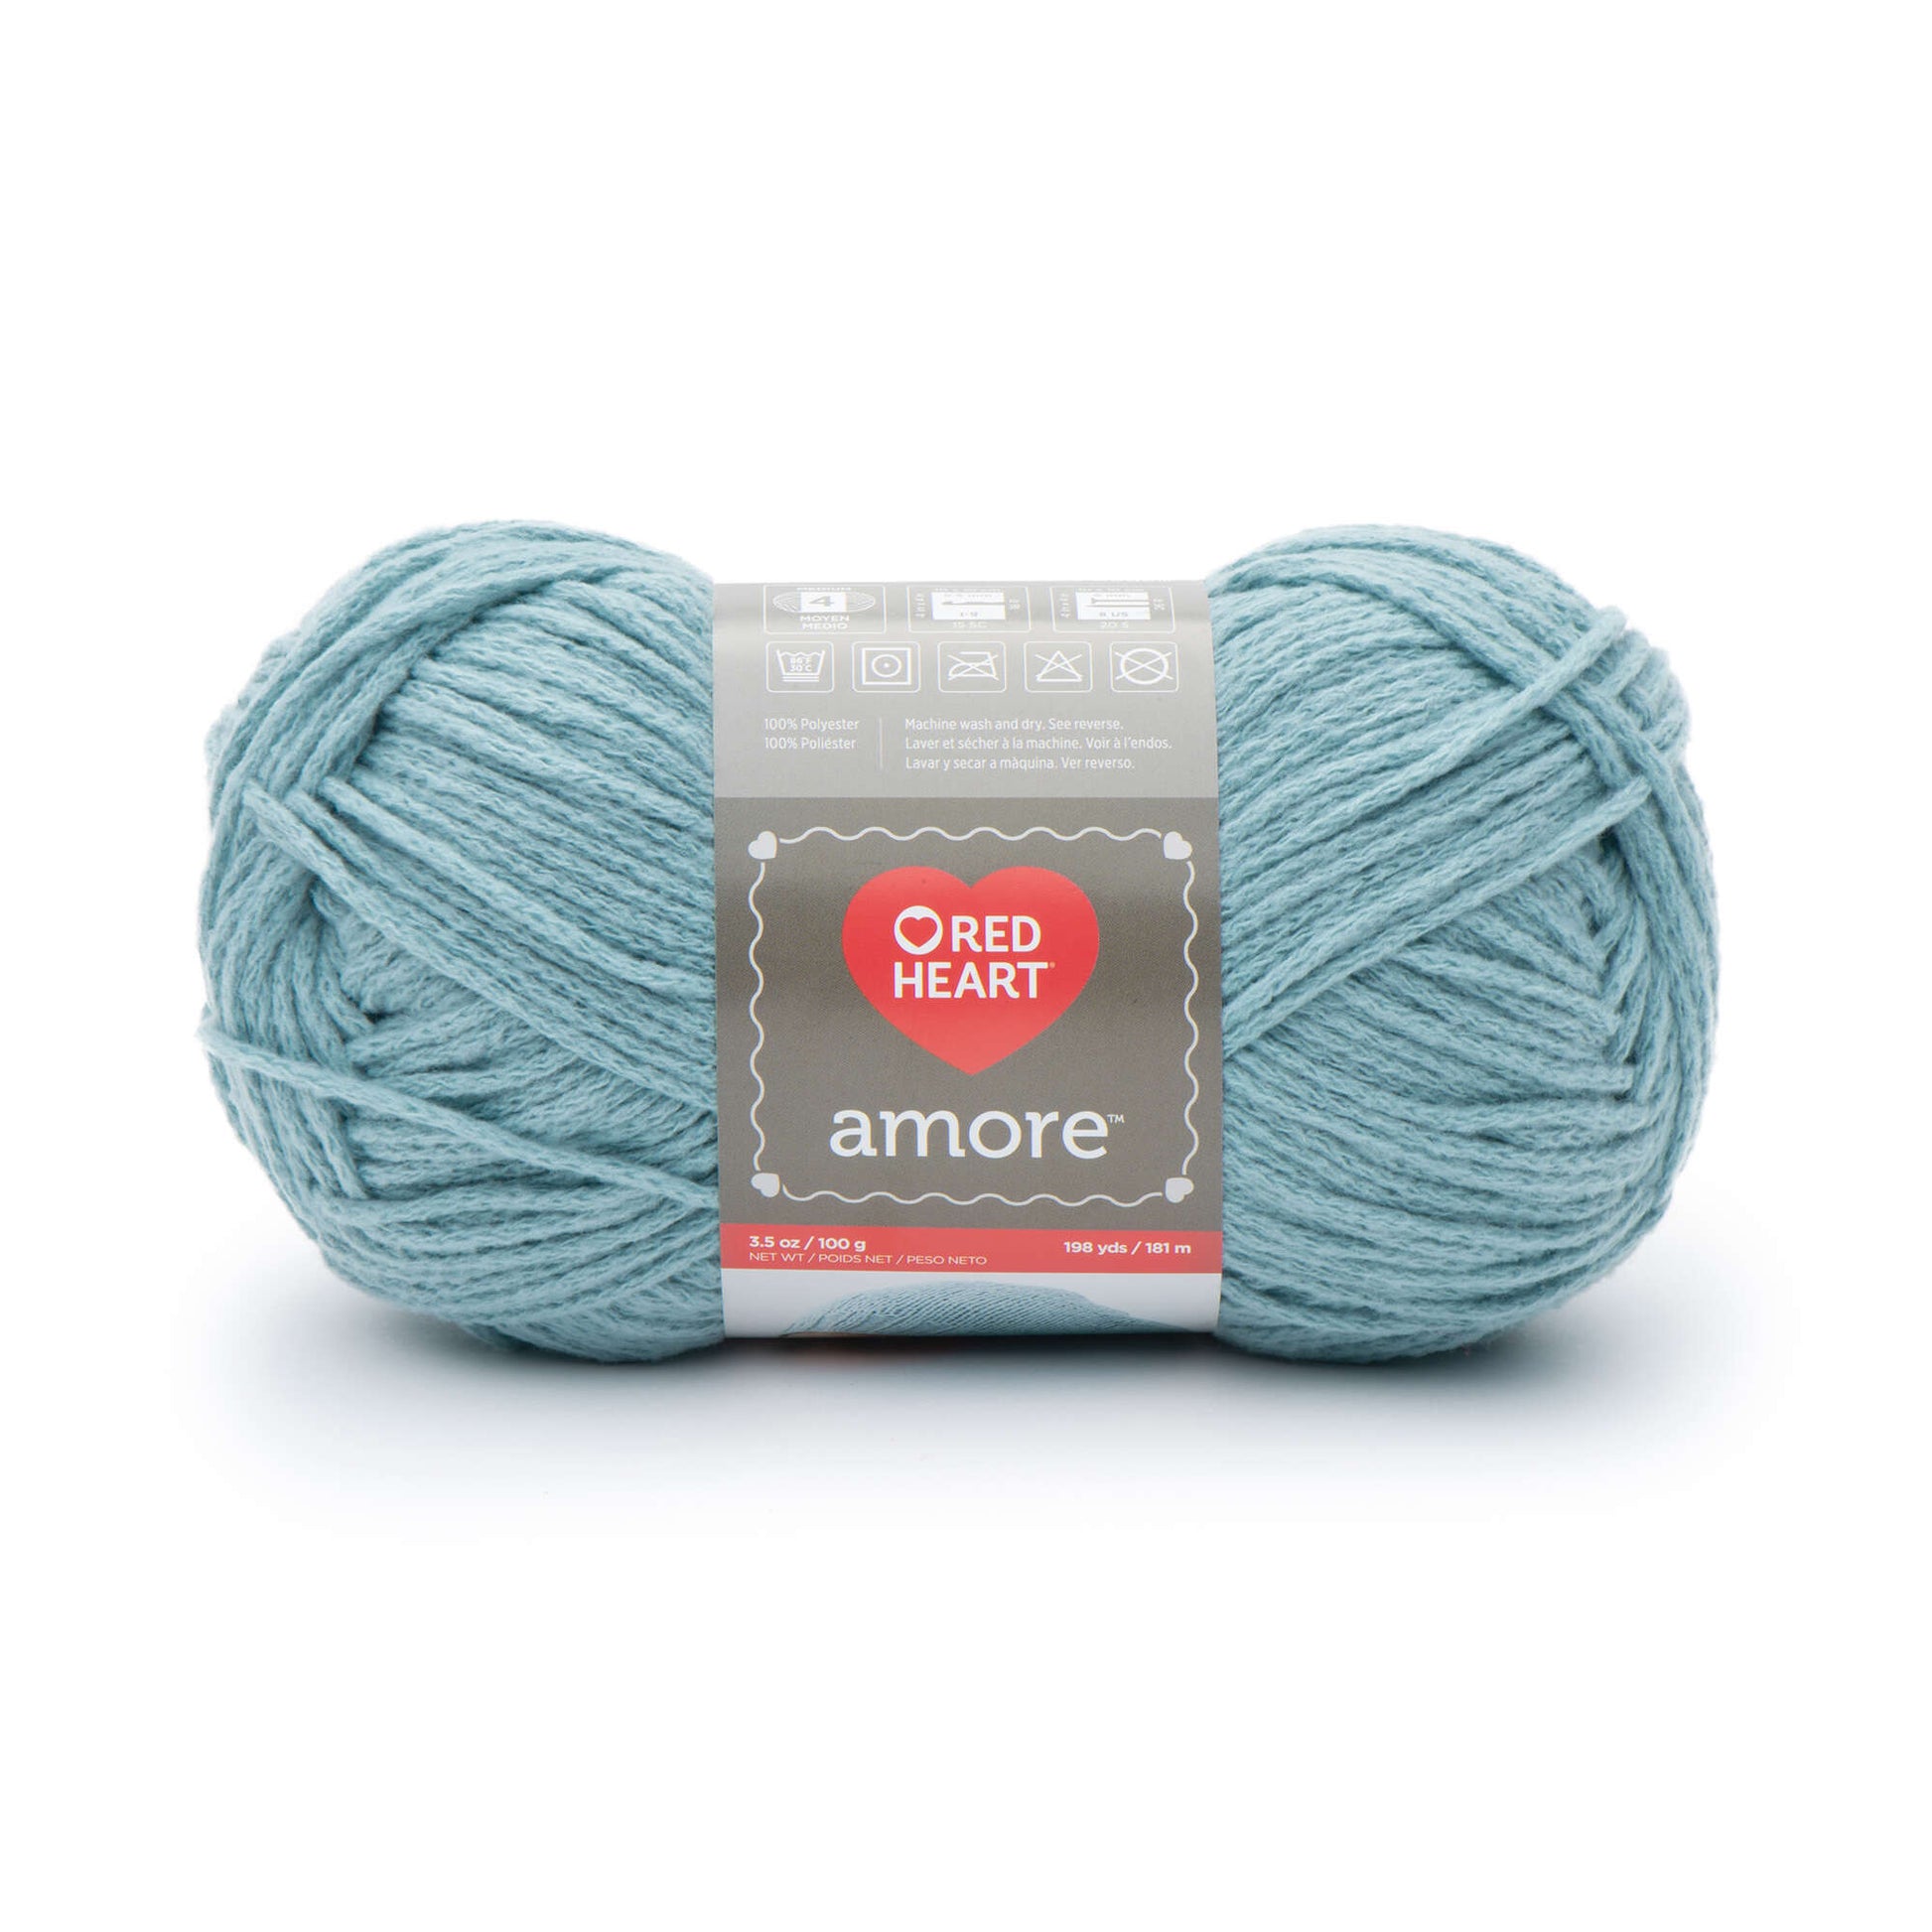 Red Heart Amore Yarn - Discontinued shades